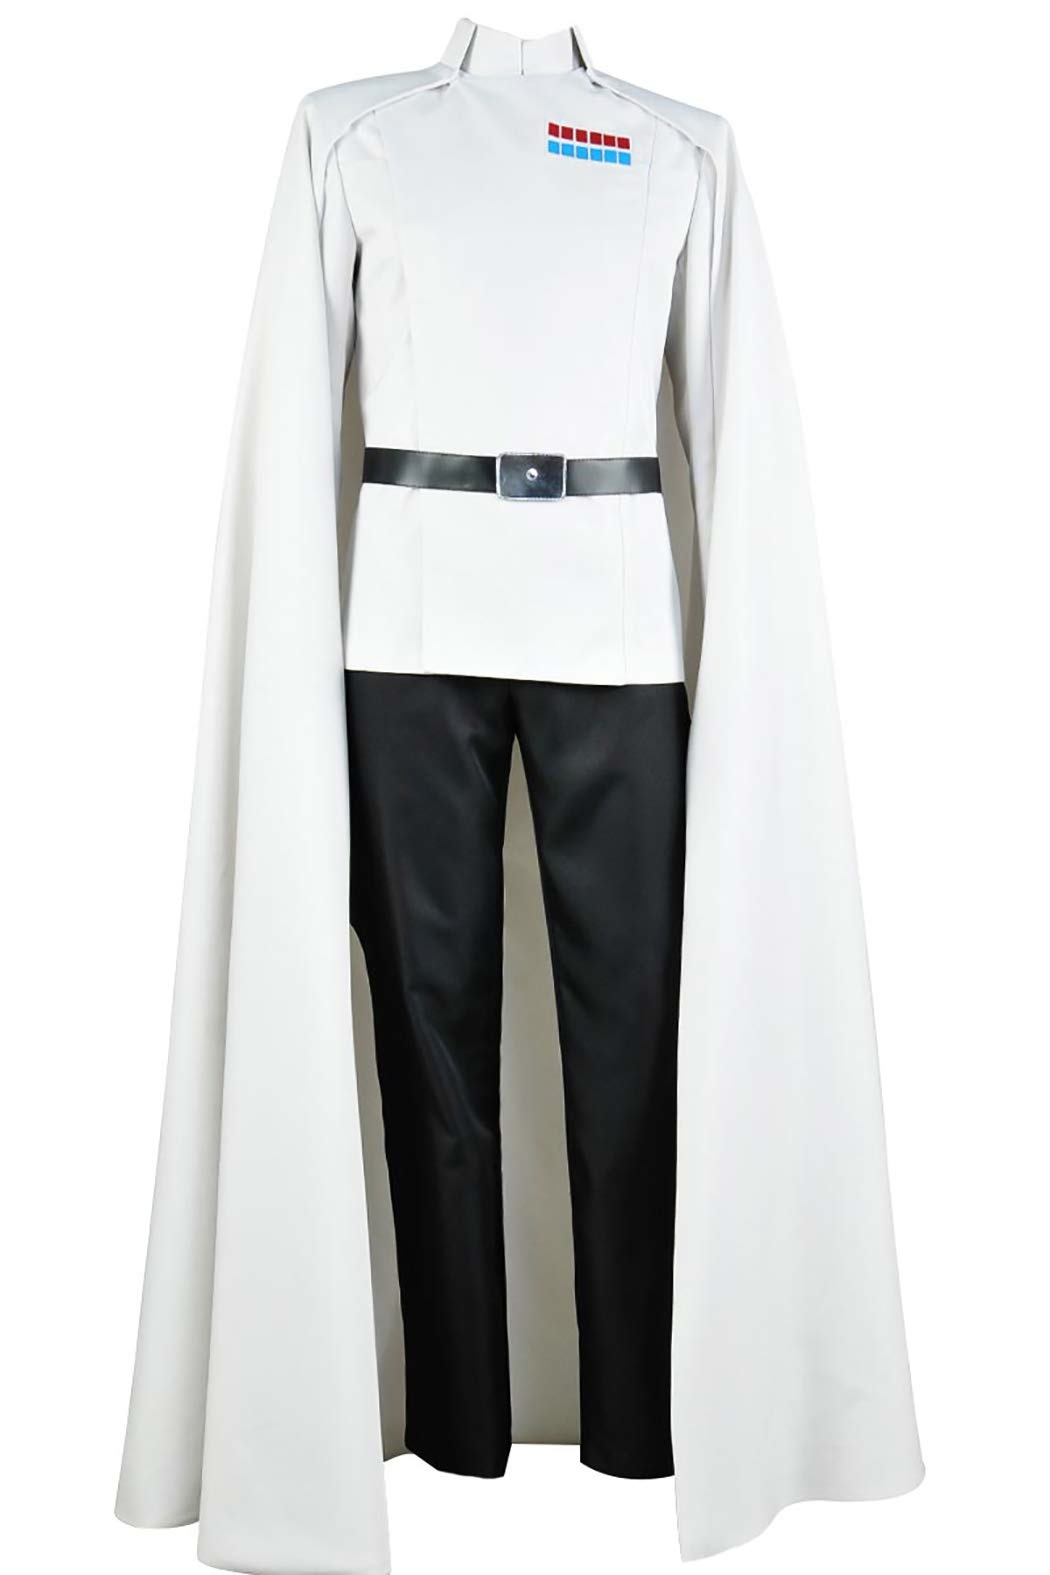 Rogue One A Star Wars Story Top Director Krennic Officer Uniform Cosplay Costume